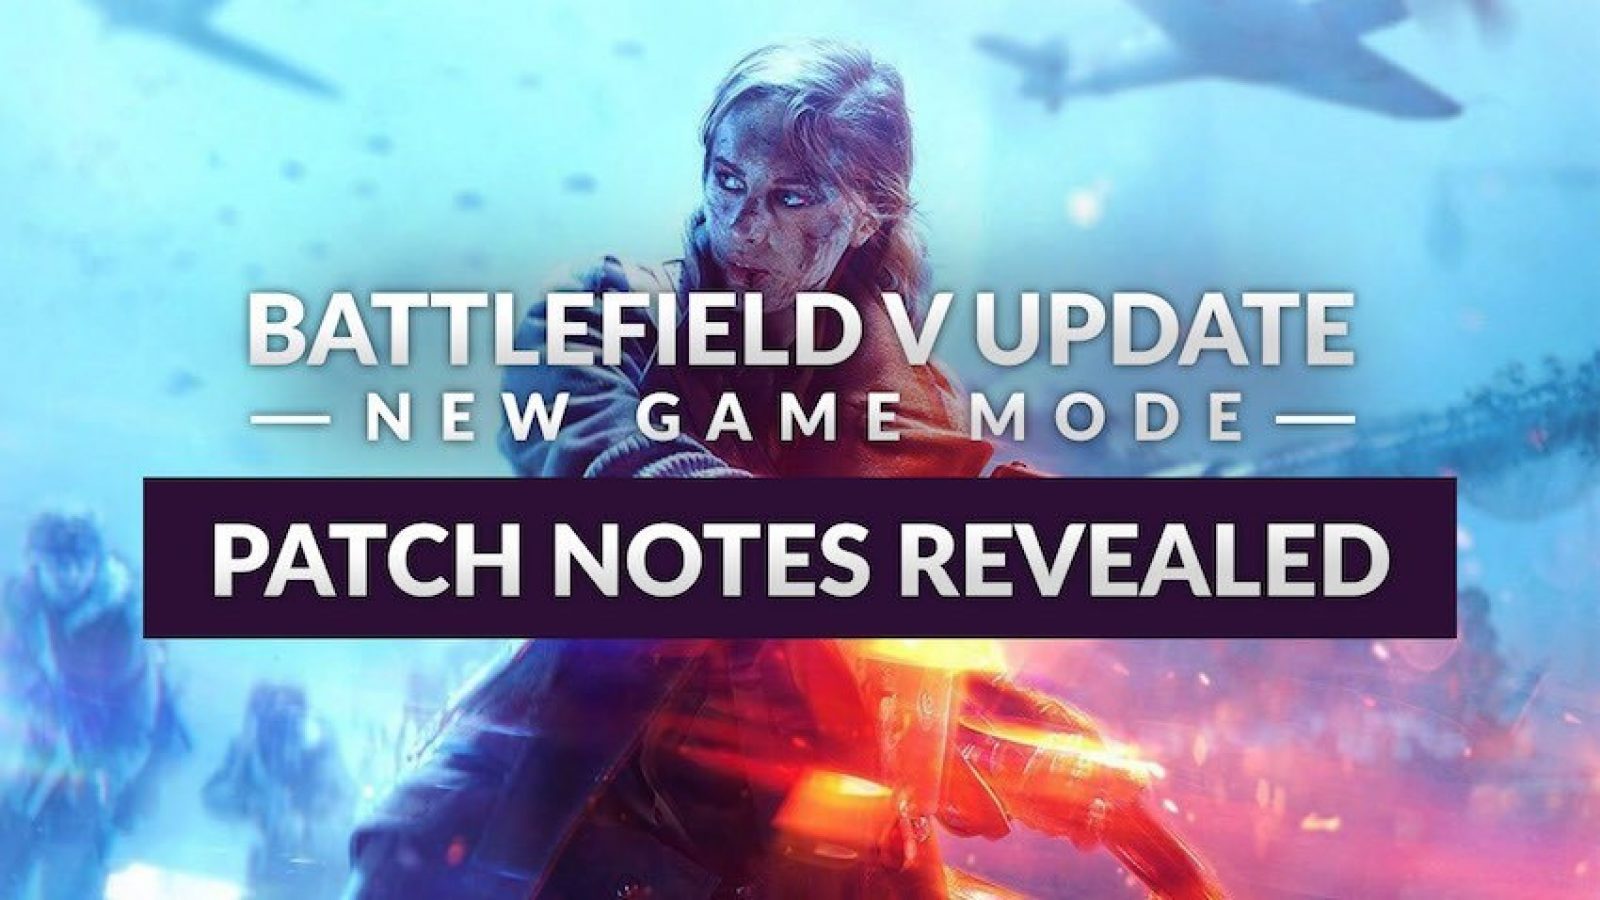 Battlefield V news & latest pictures from